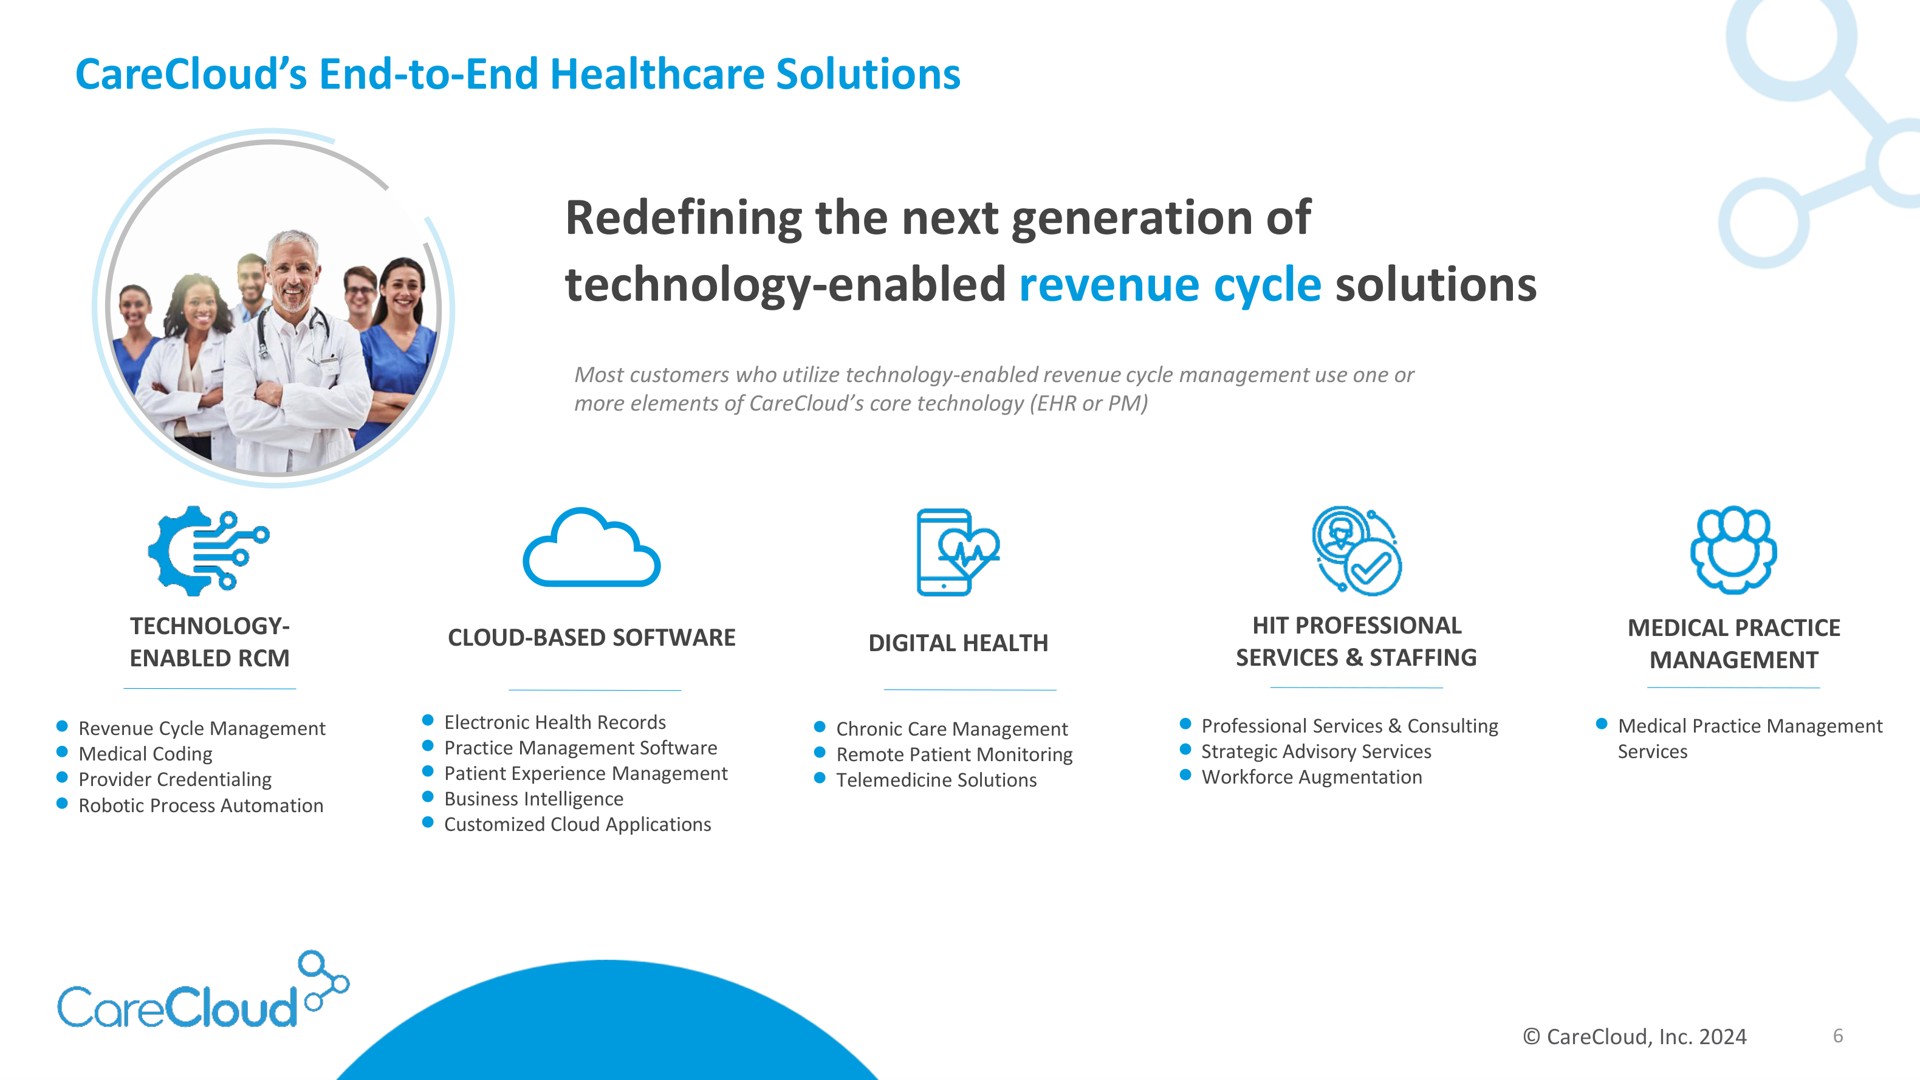 end to end solutions redefining the next generation of technology enabled revenue cycle solutions | CareCloud